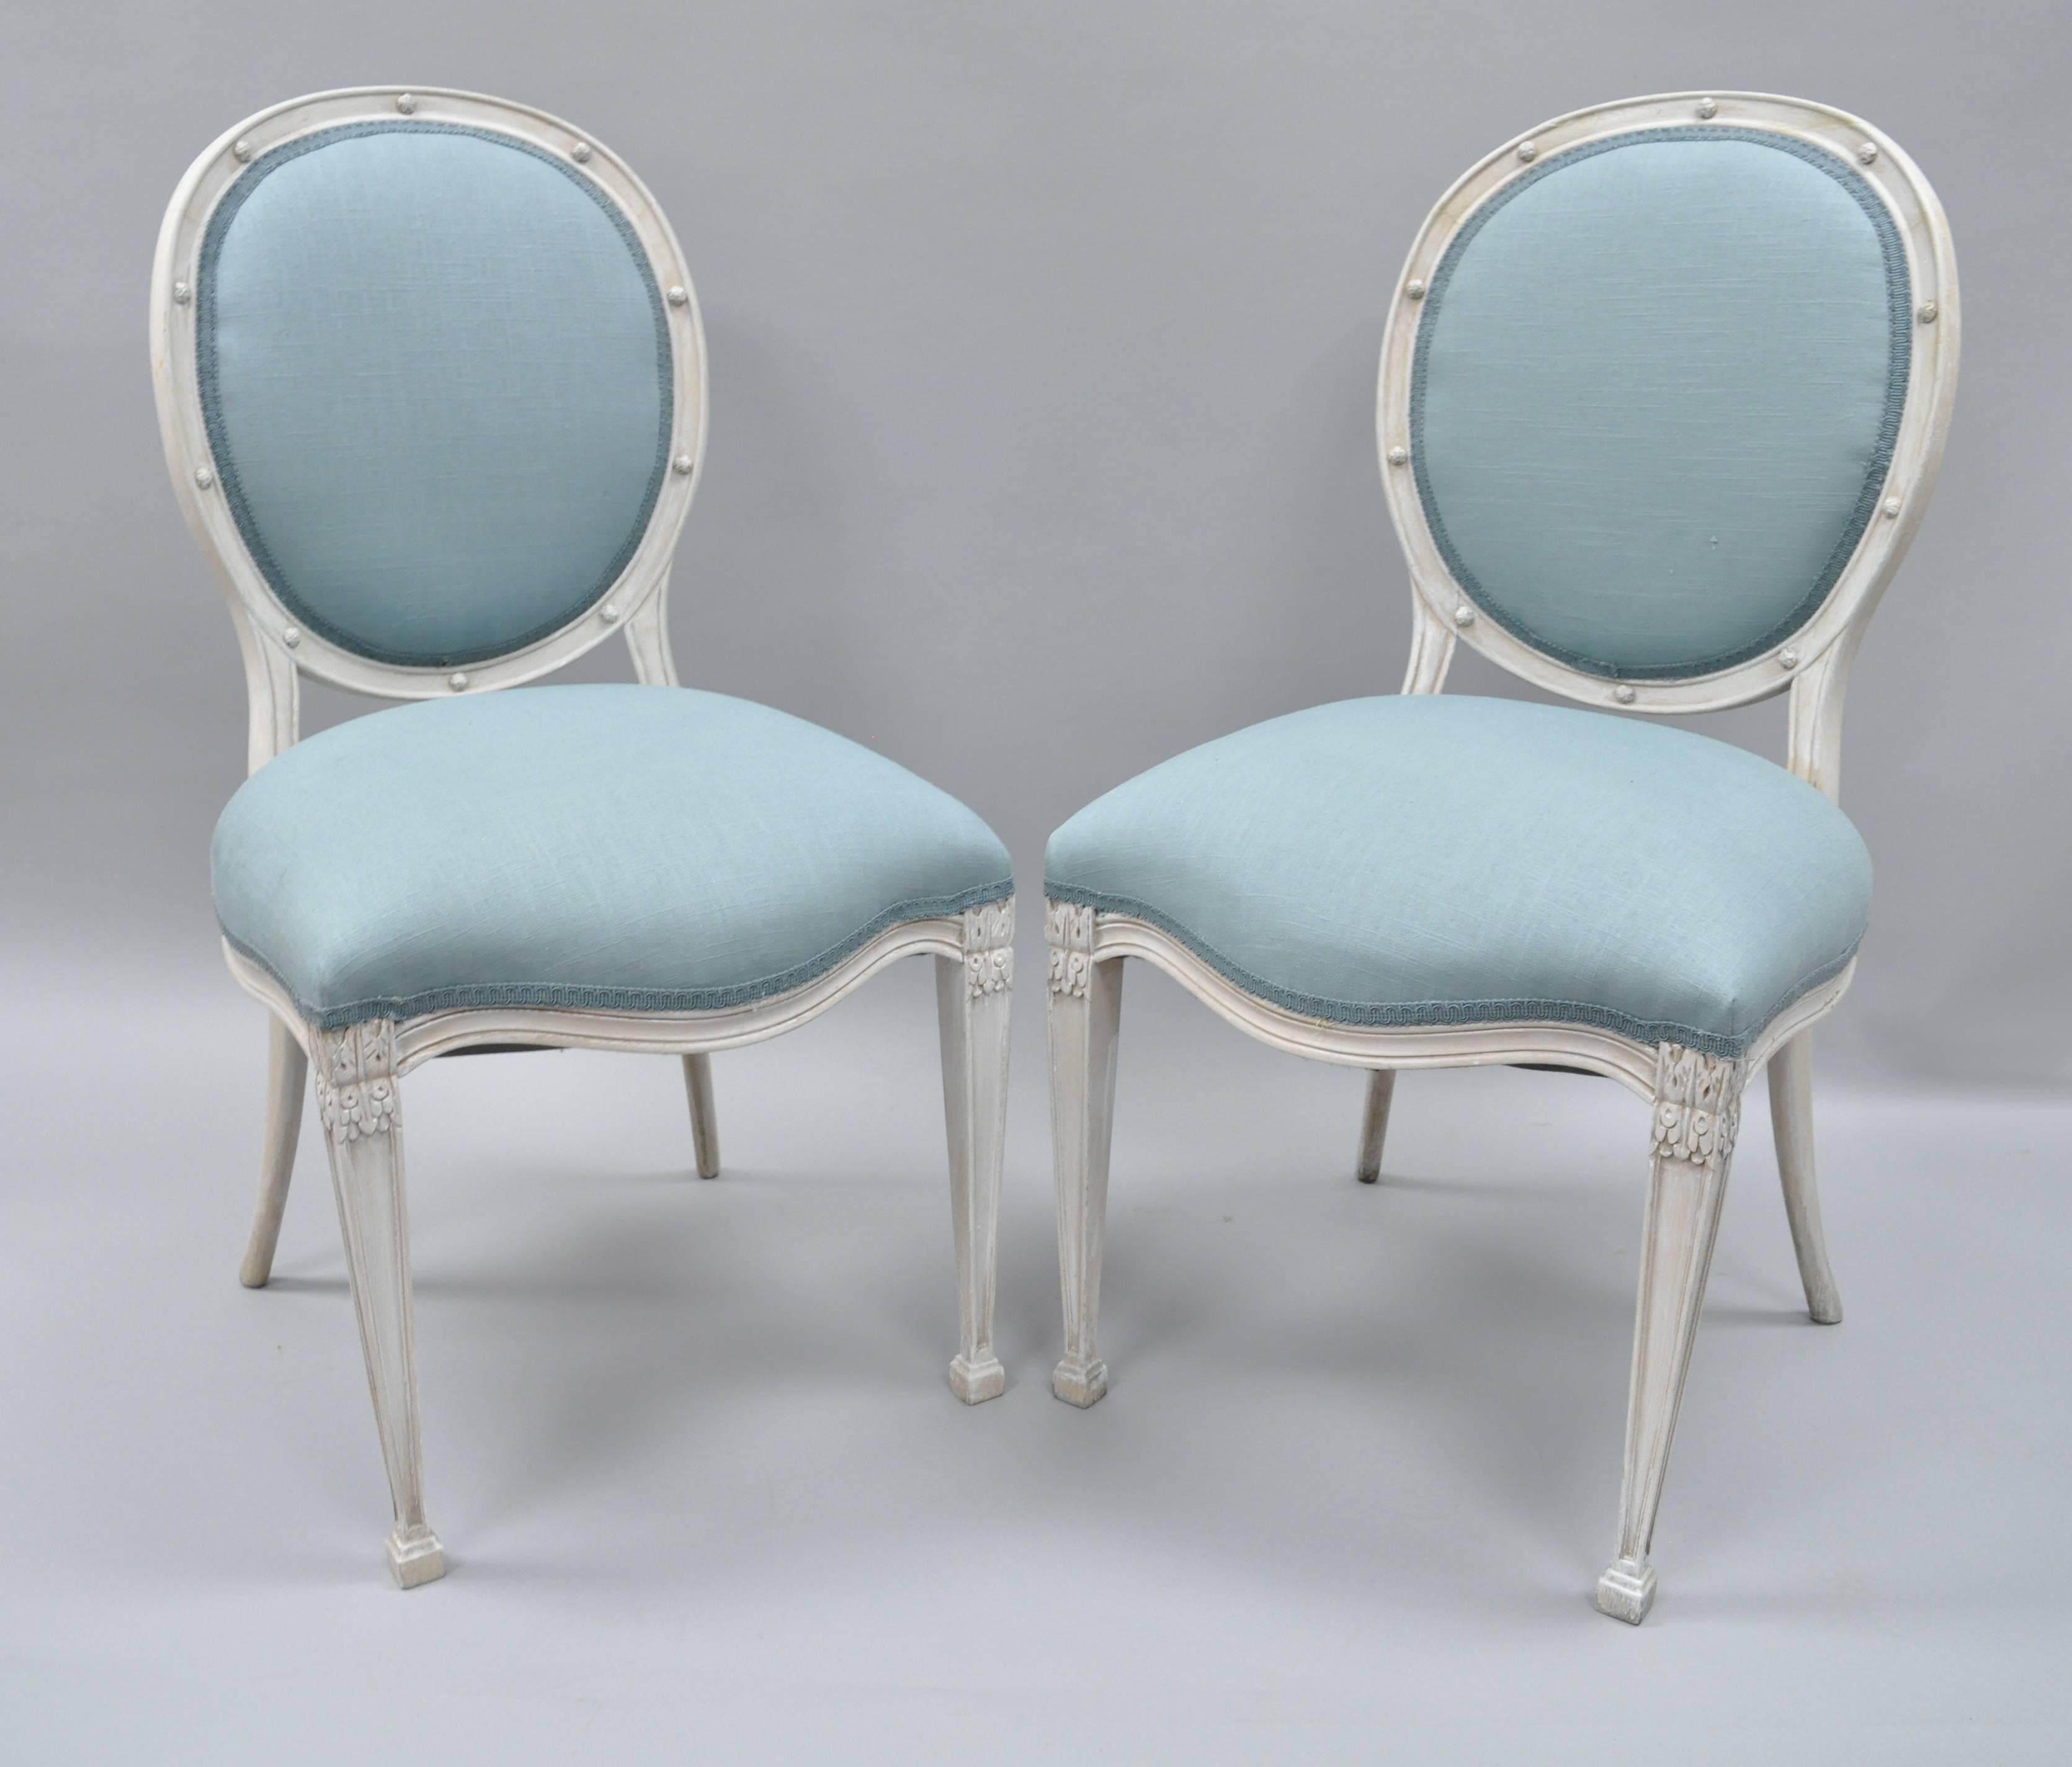 Set of six French Regency or neoclassical style dining side chairs, circa late 20th century. Set features solid wood construction, white distress painted finish, oval upholstered backs, blue fabric, sleek tapered legs, nice carved details.